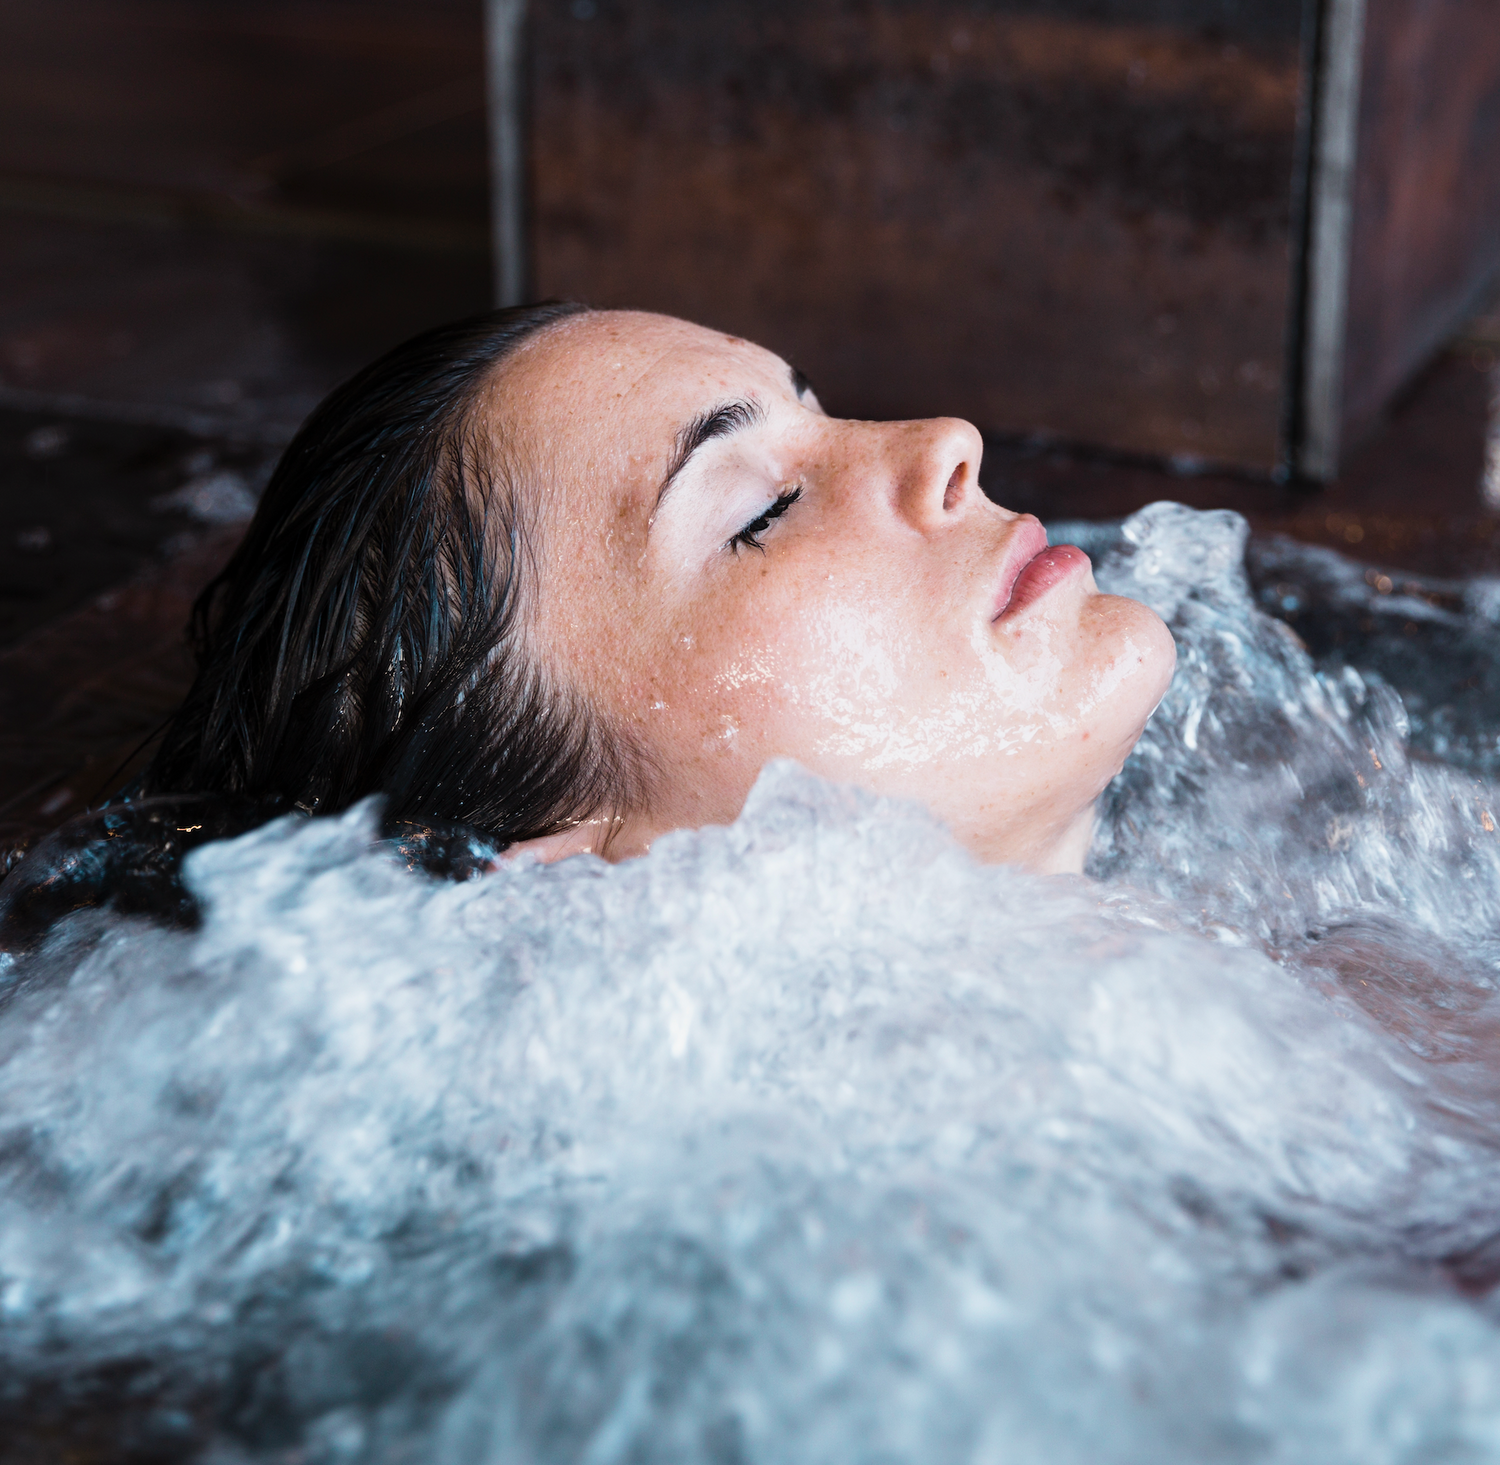 Ice baths at home: What are your options?